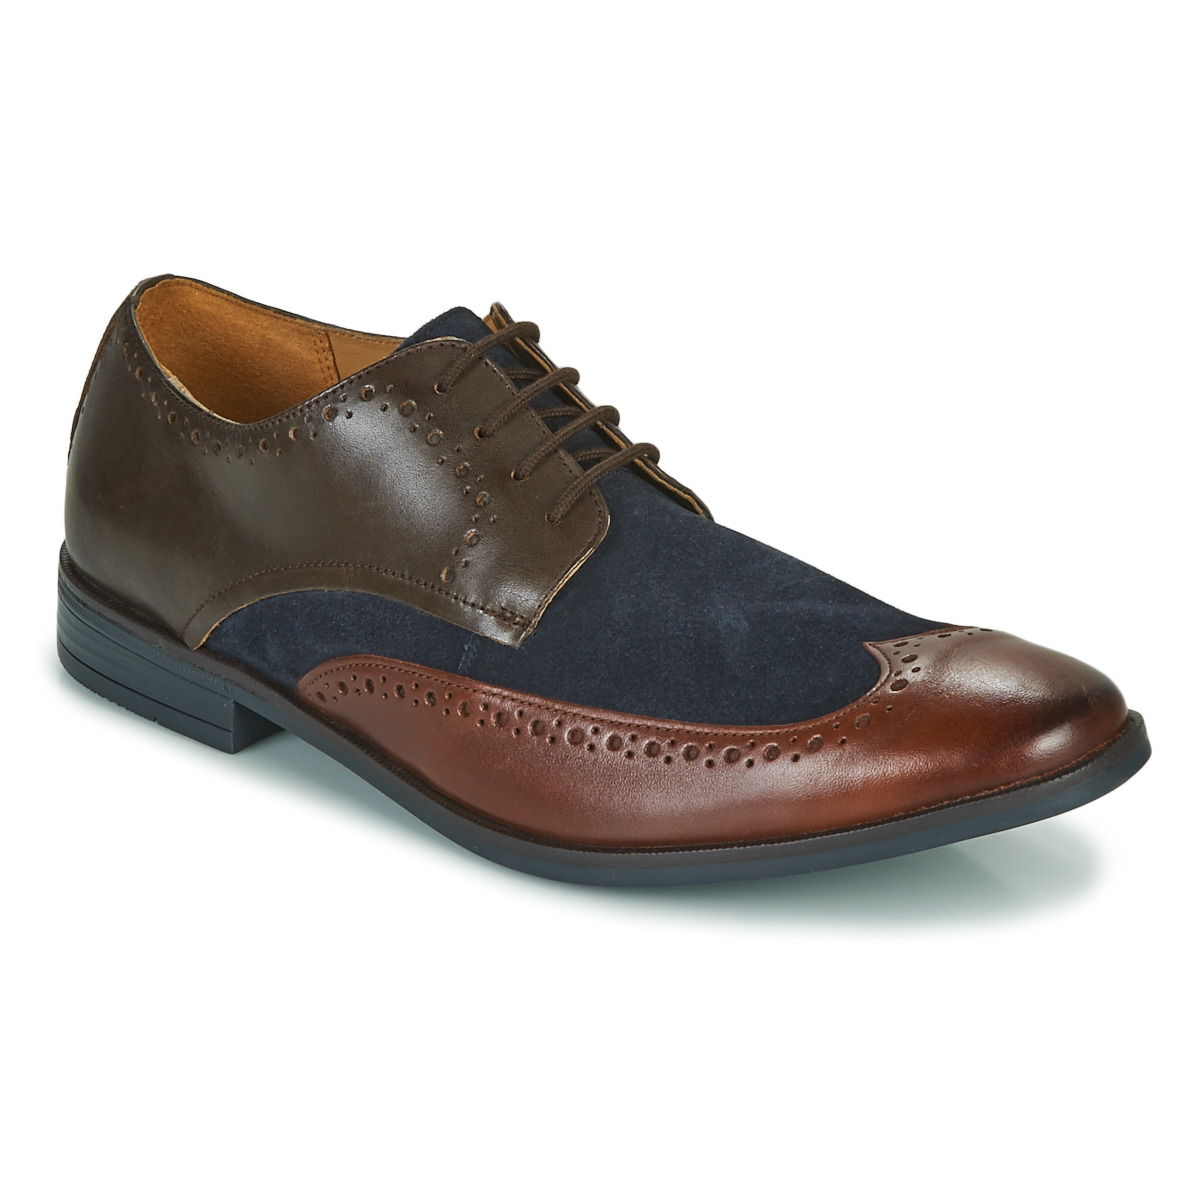 Save 56% Mens Shoes Lace-ups Brogues for Men Clarks Leather Stanford Limit in Blue Navy Leather Navy Leather Blue 